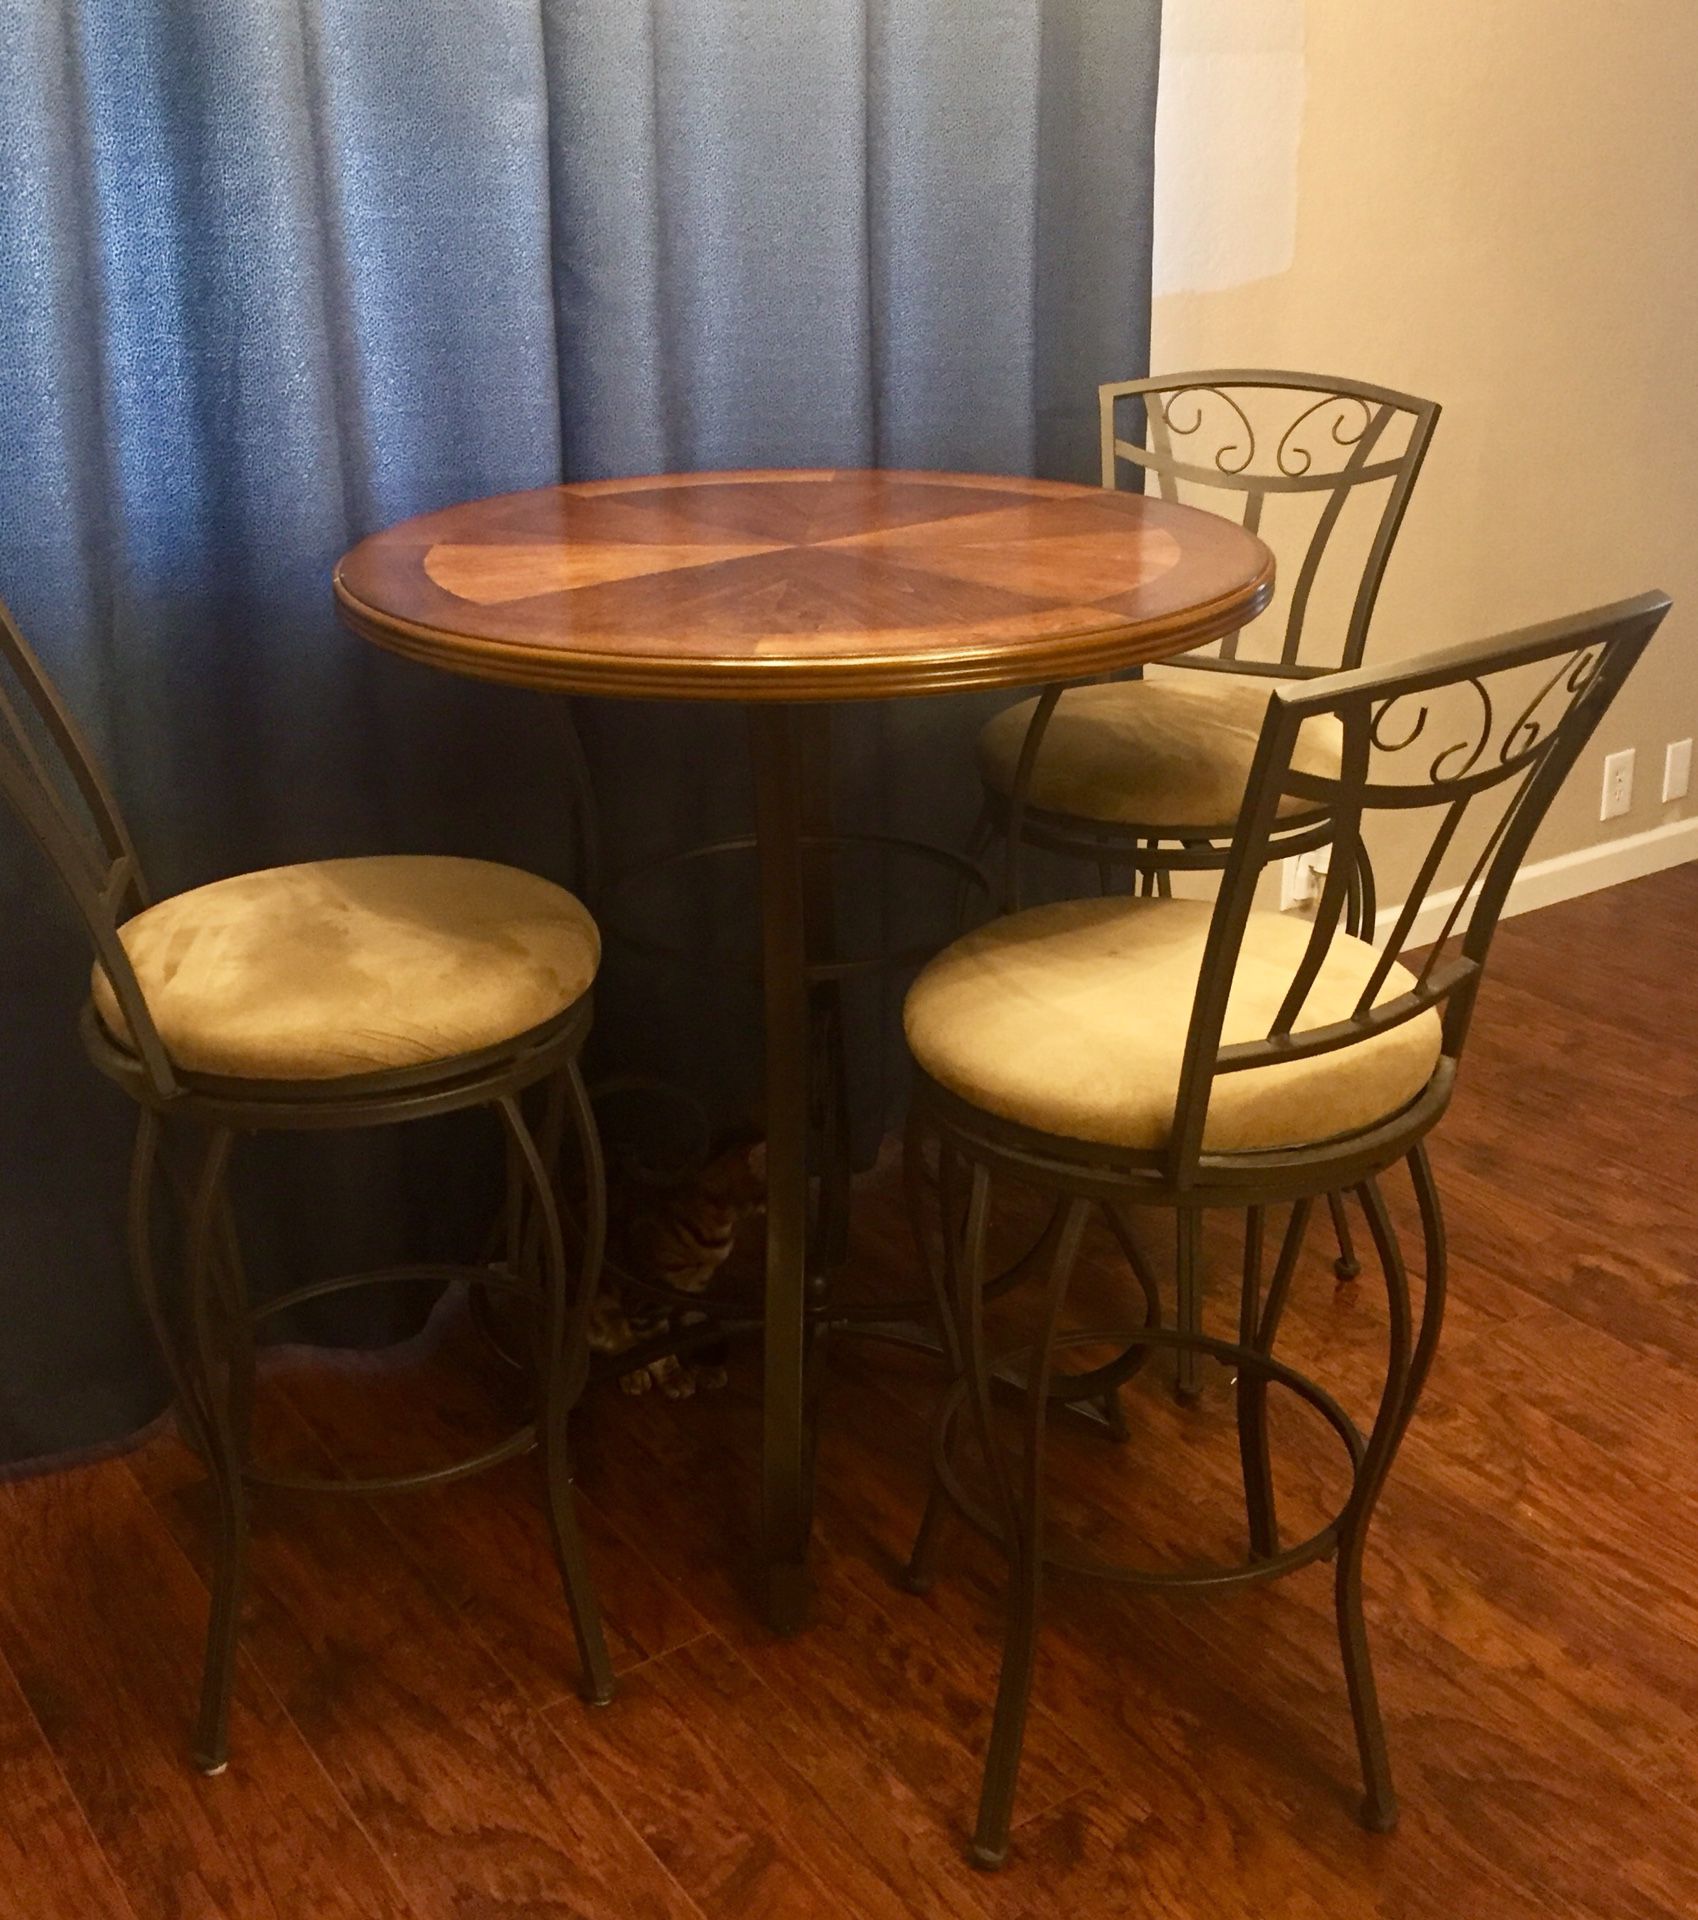 Tall Bar Table with chairs